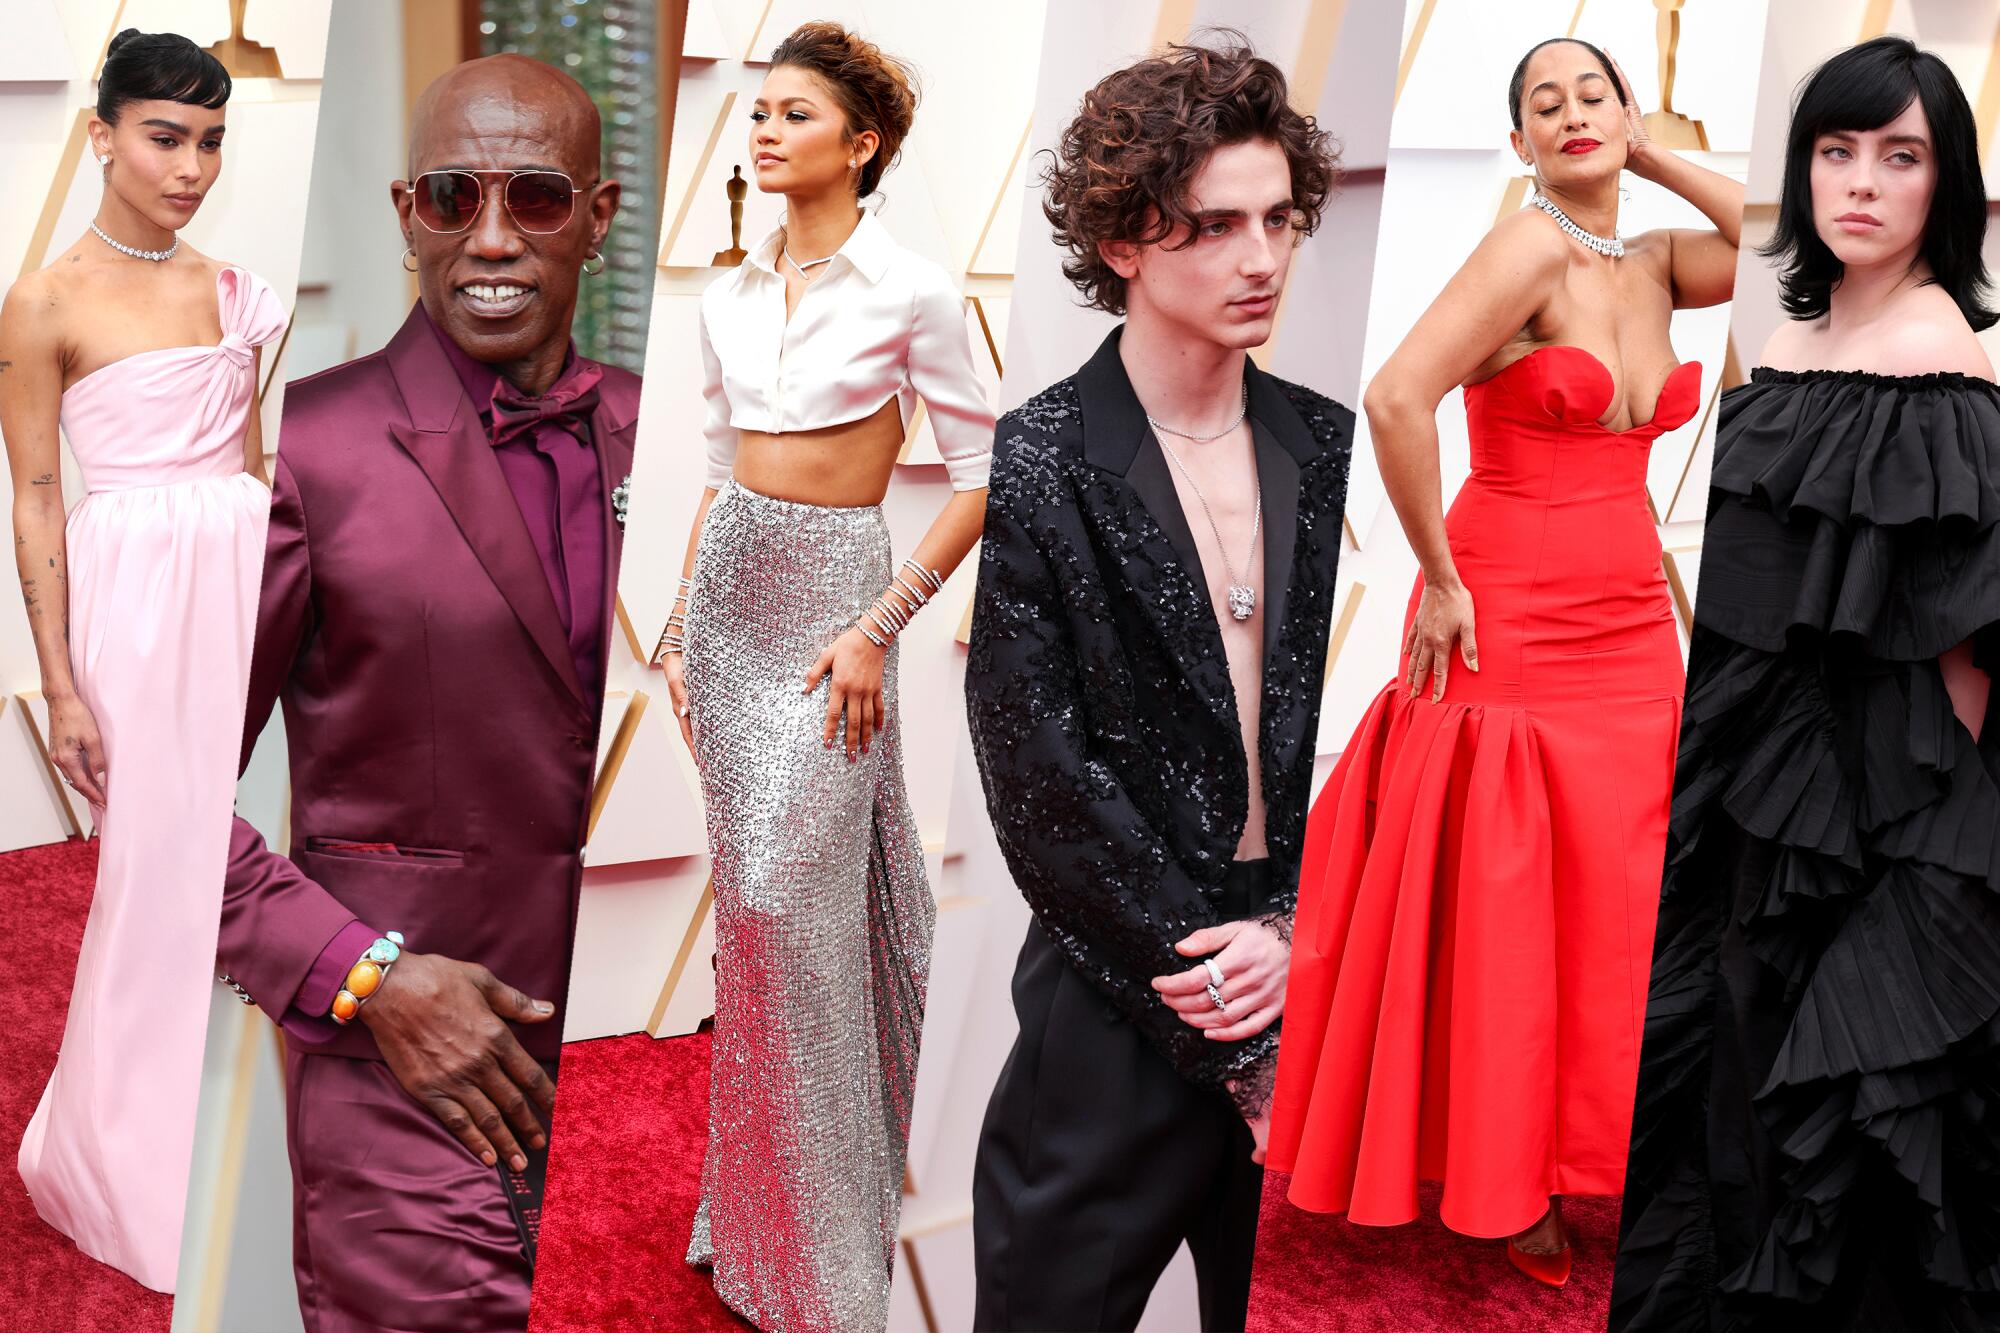 Photos of people in gowns and tuxes on the red carpet at the Oscars in 2022.